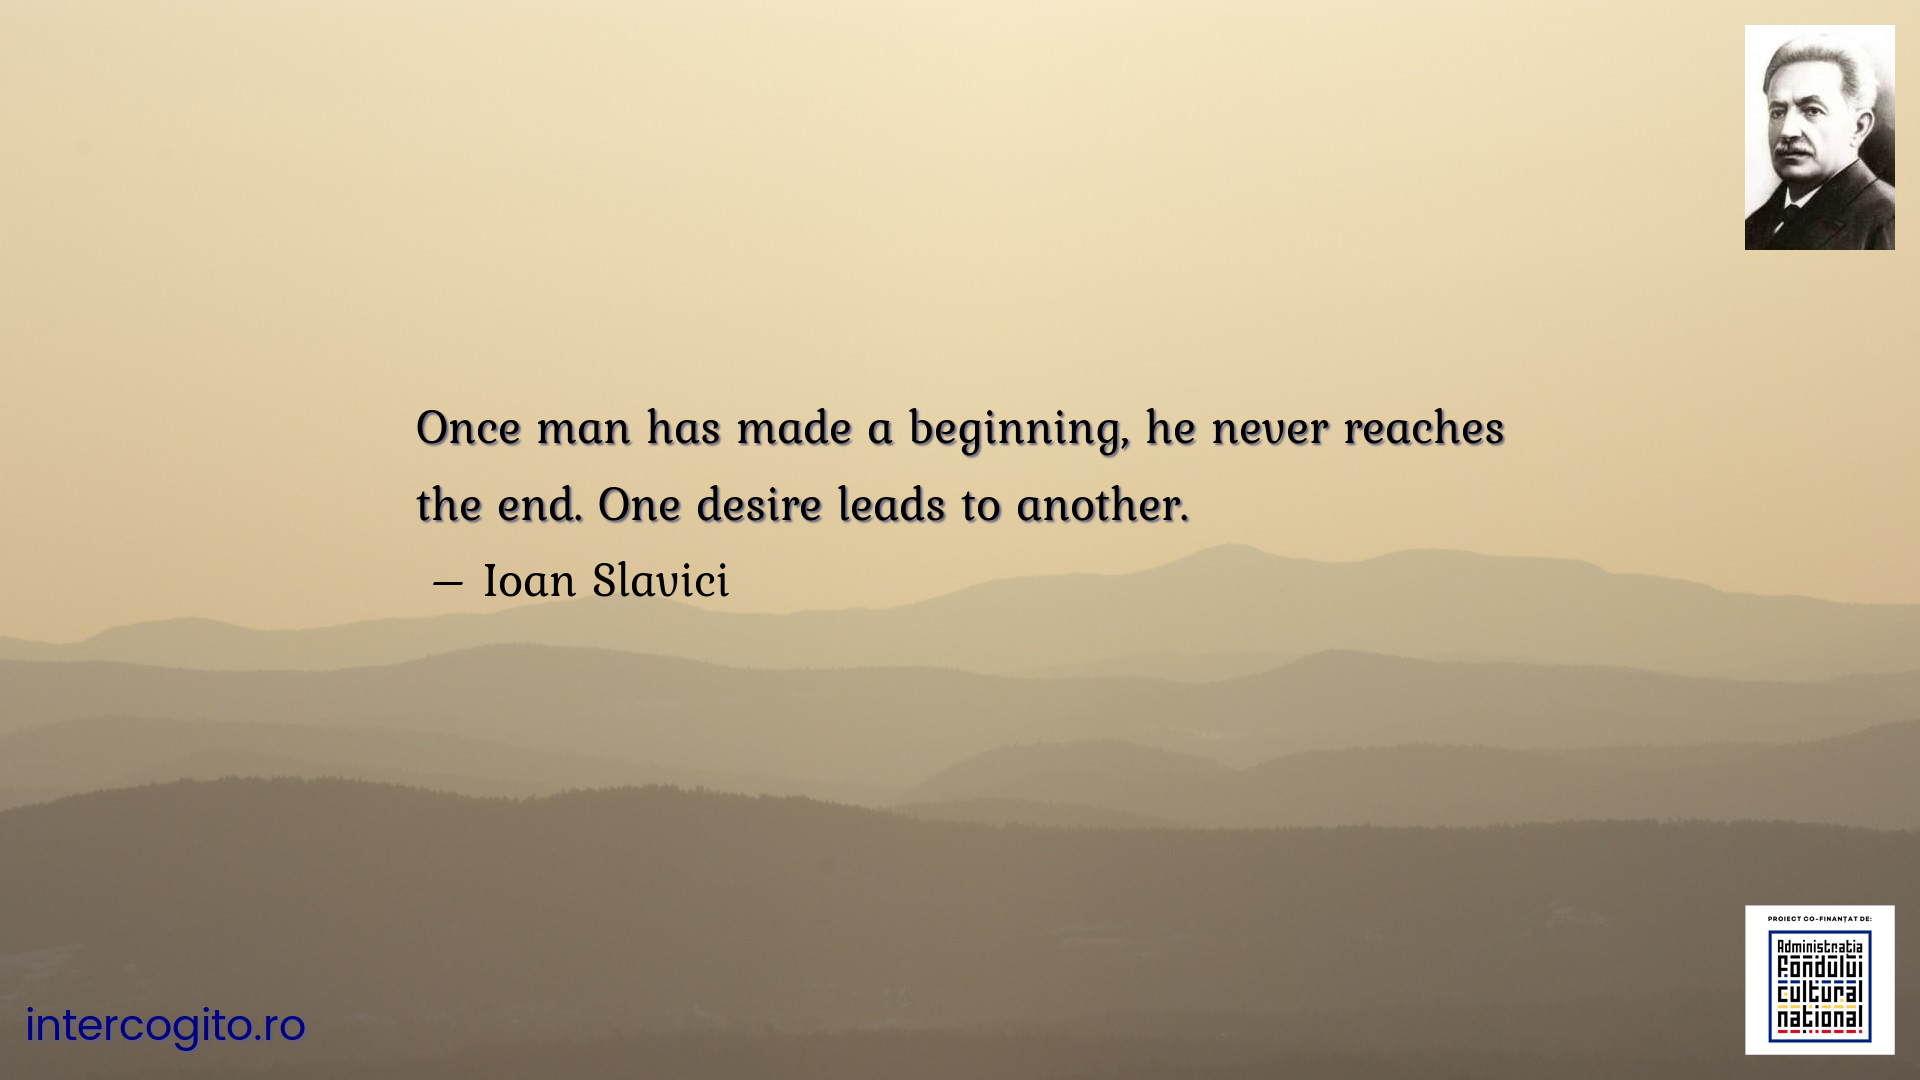 Once man has made a beginning, he never reaches the end. One desire leads to another.